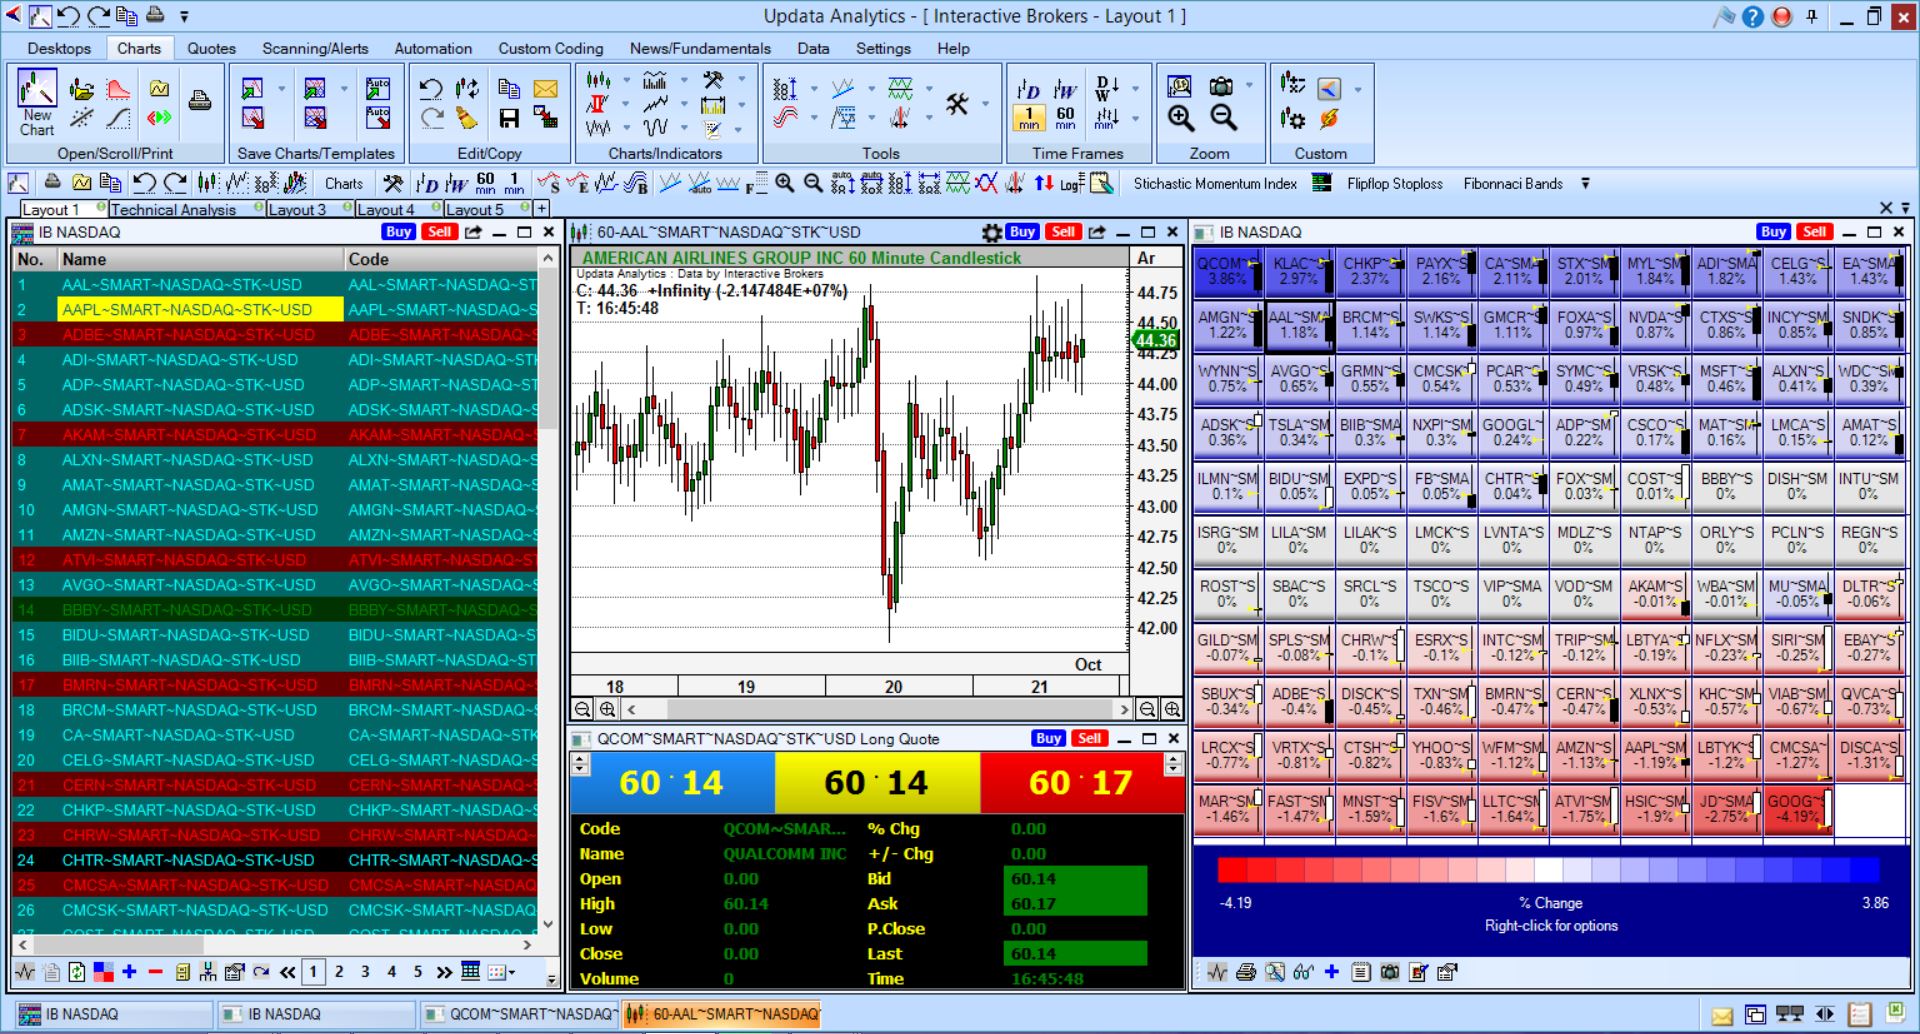 Add advanced charting to your Interactive Brokers trading platform with Updata